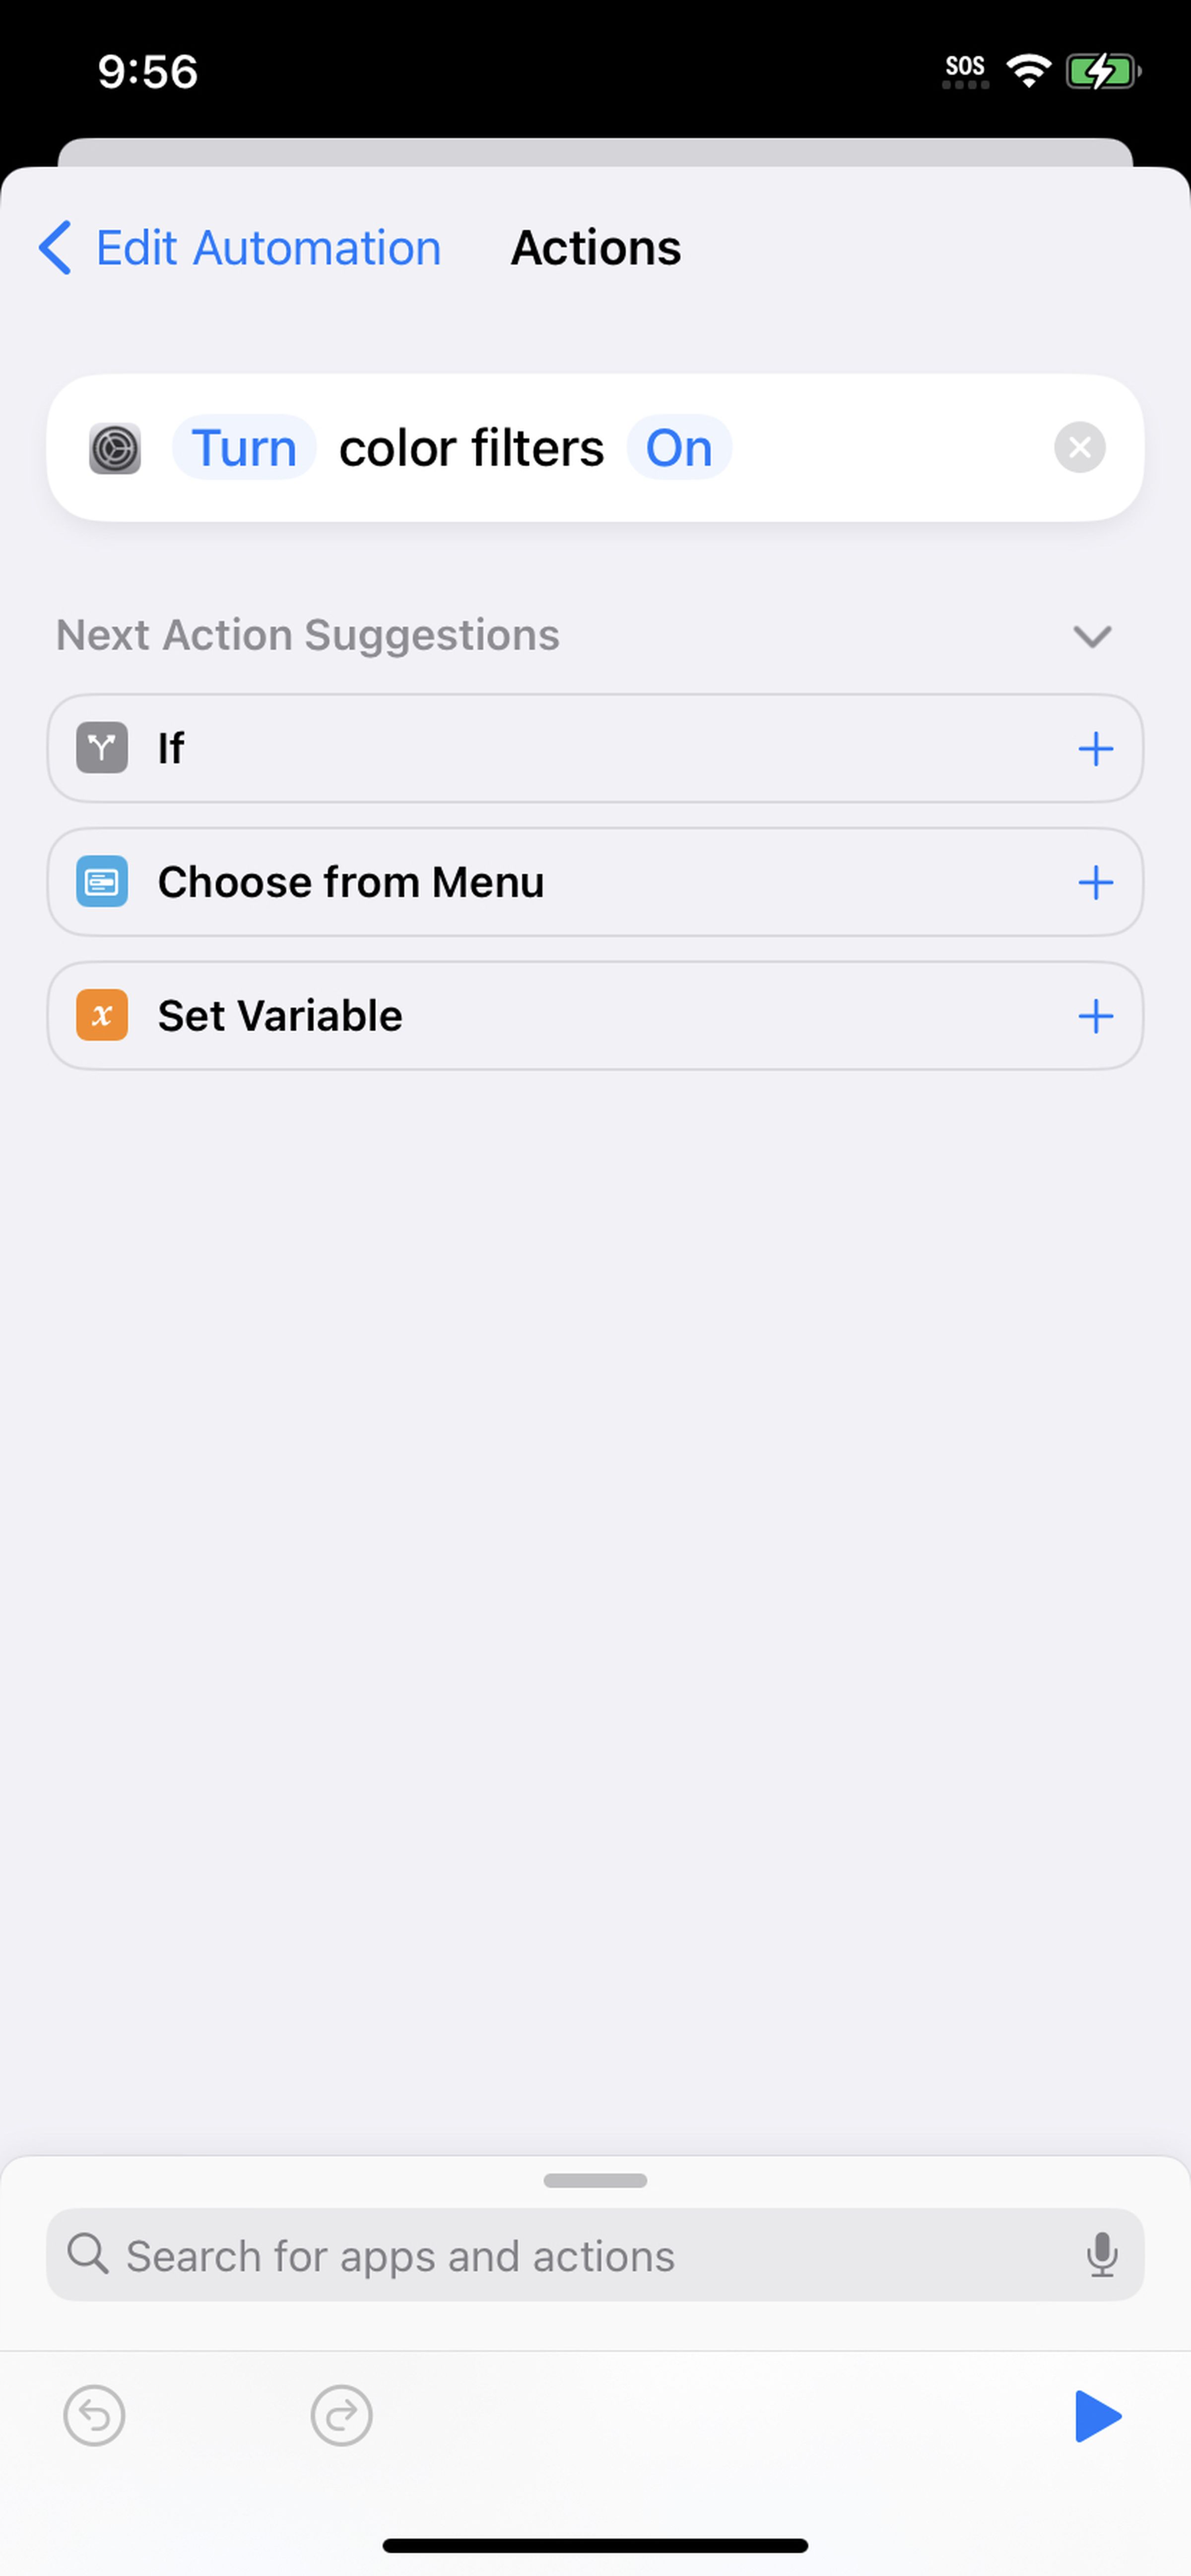 Shortcut Actions page with Turn color filters On activated, and other action suggestions listed below it, including If, Choose from Menu, and Set Variable.